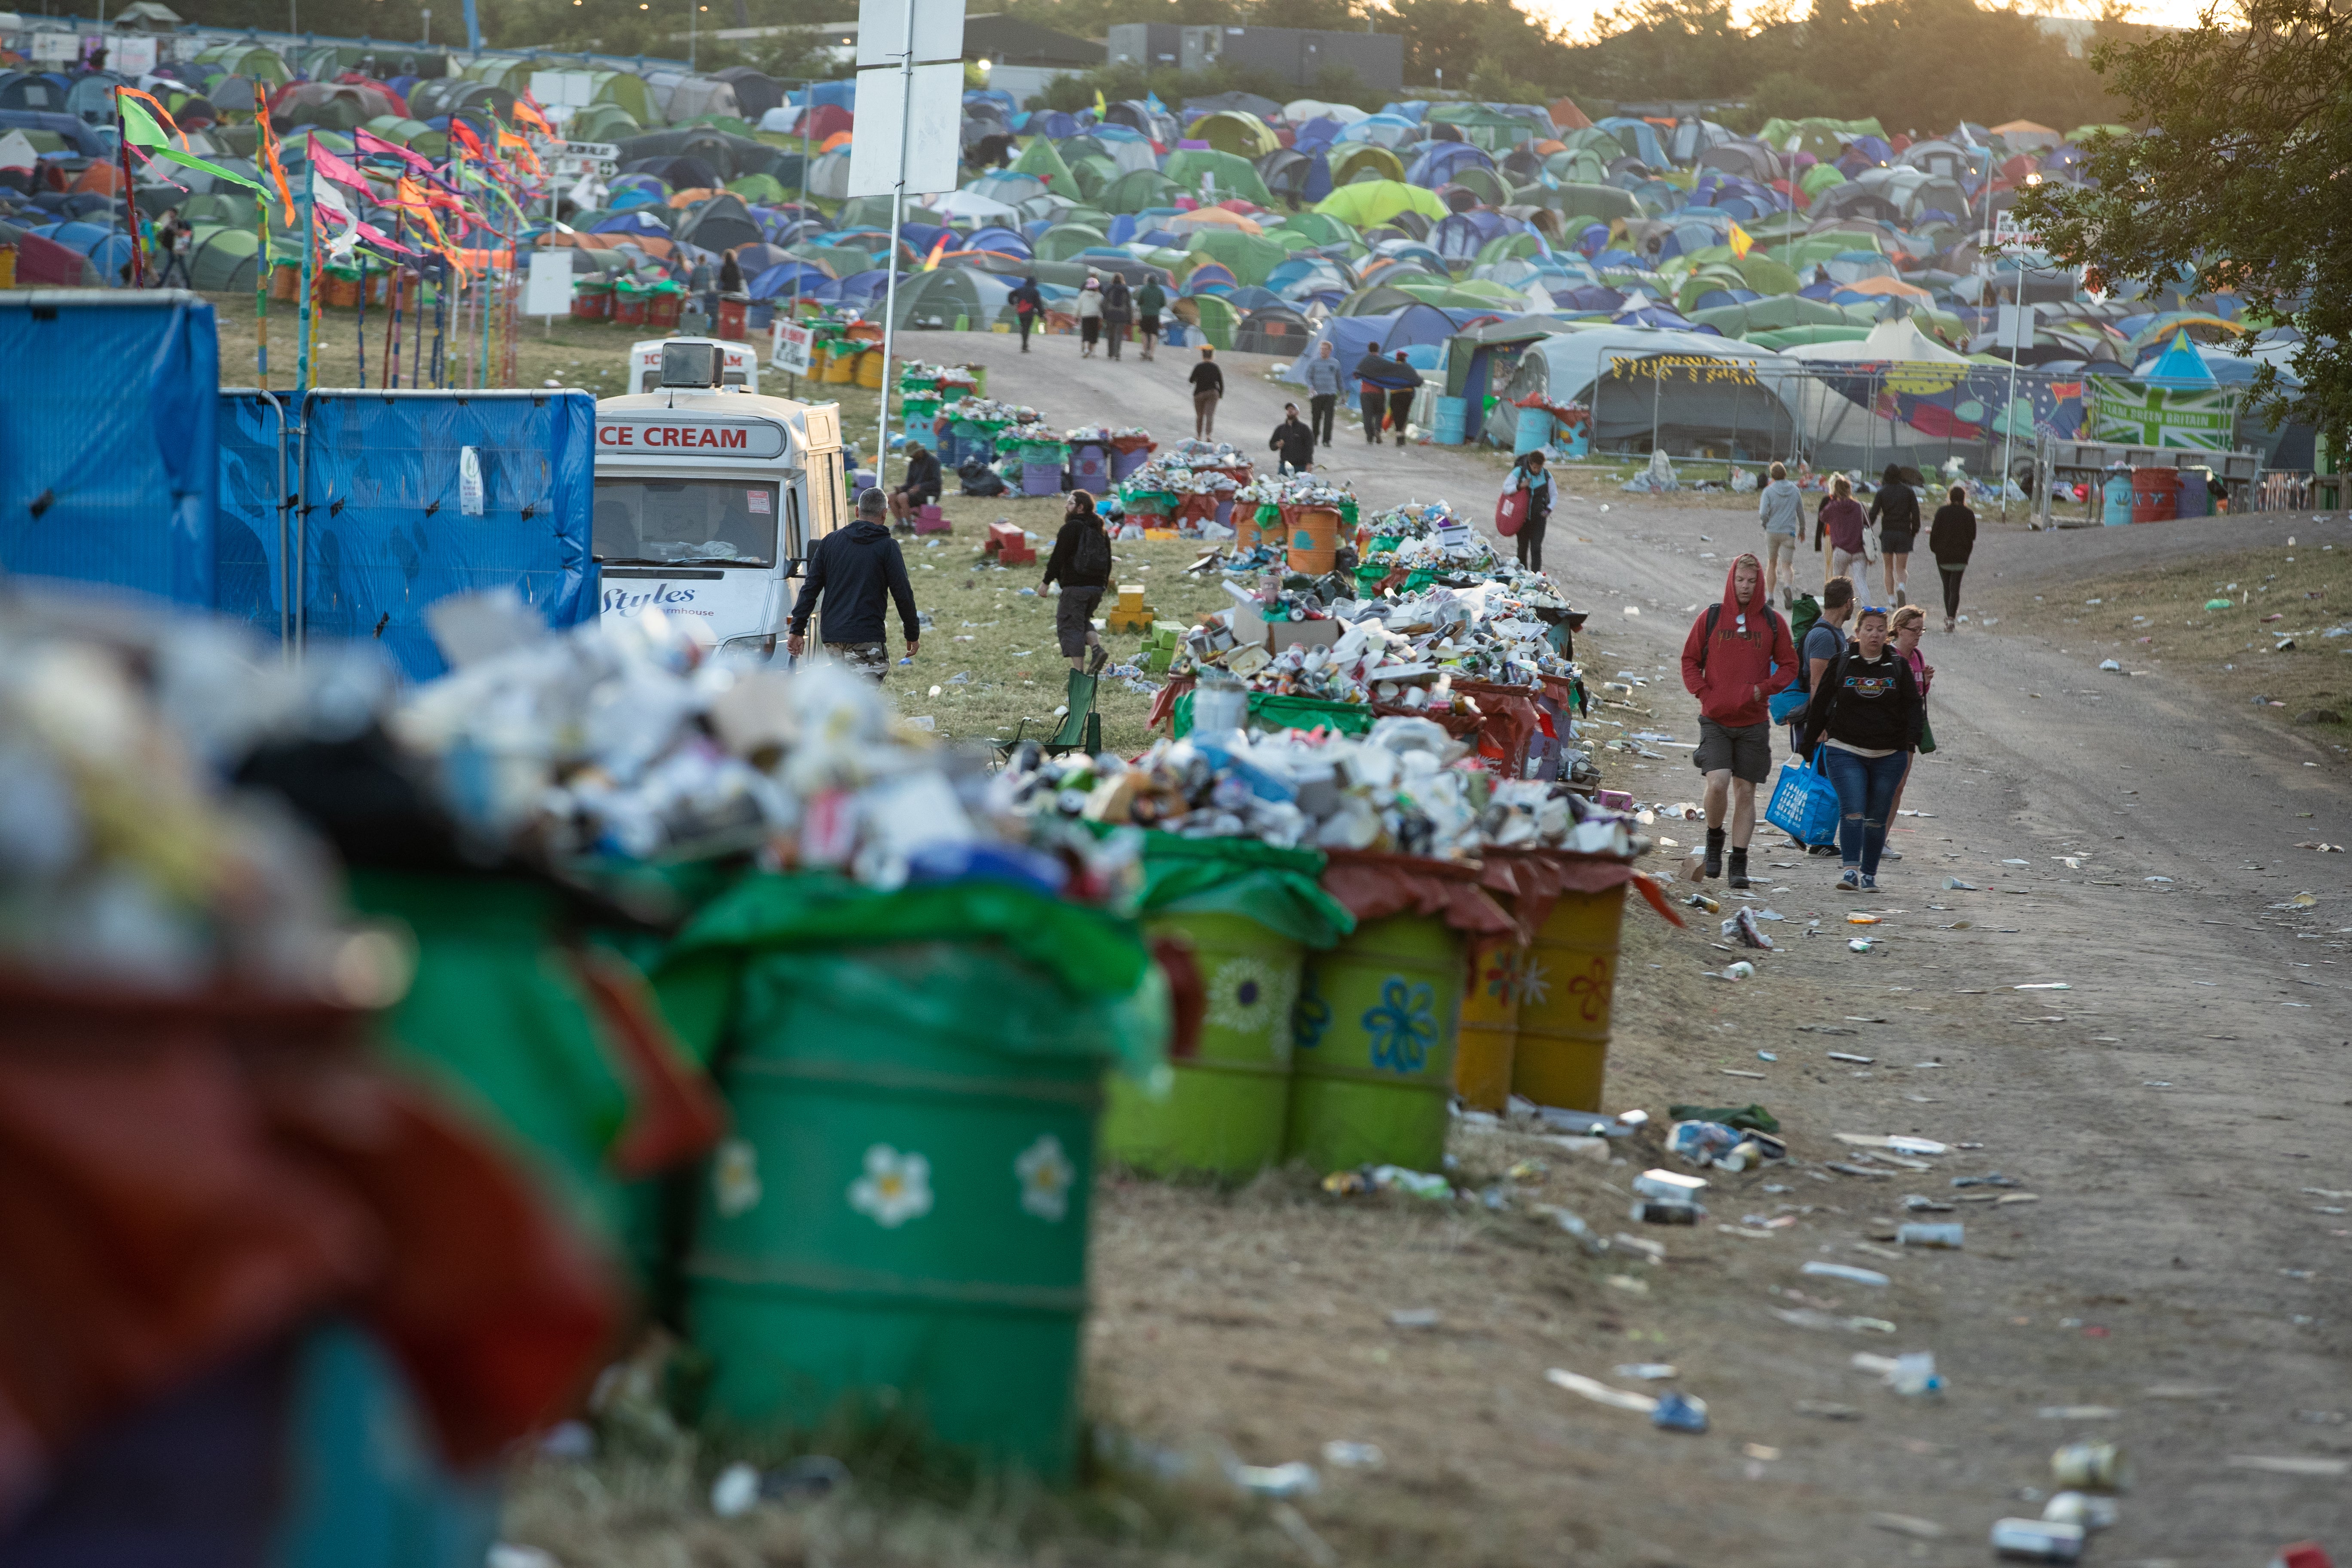 The end of Glastonbury festival in 2019